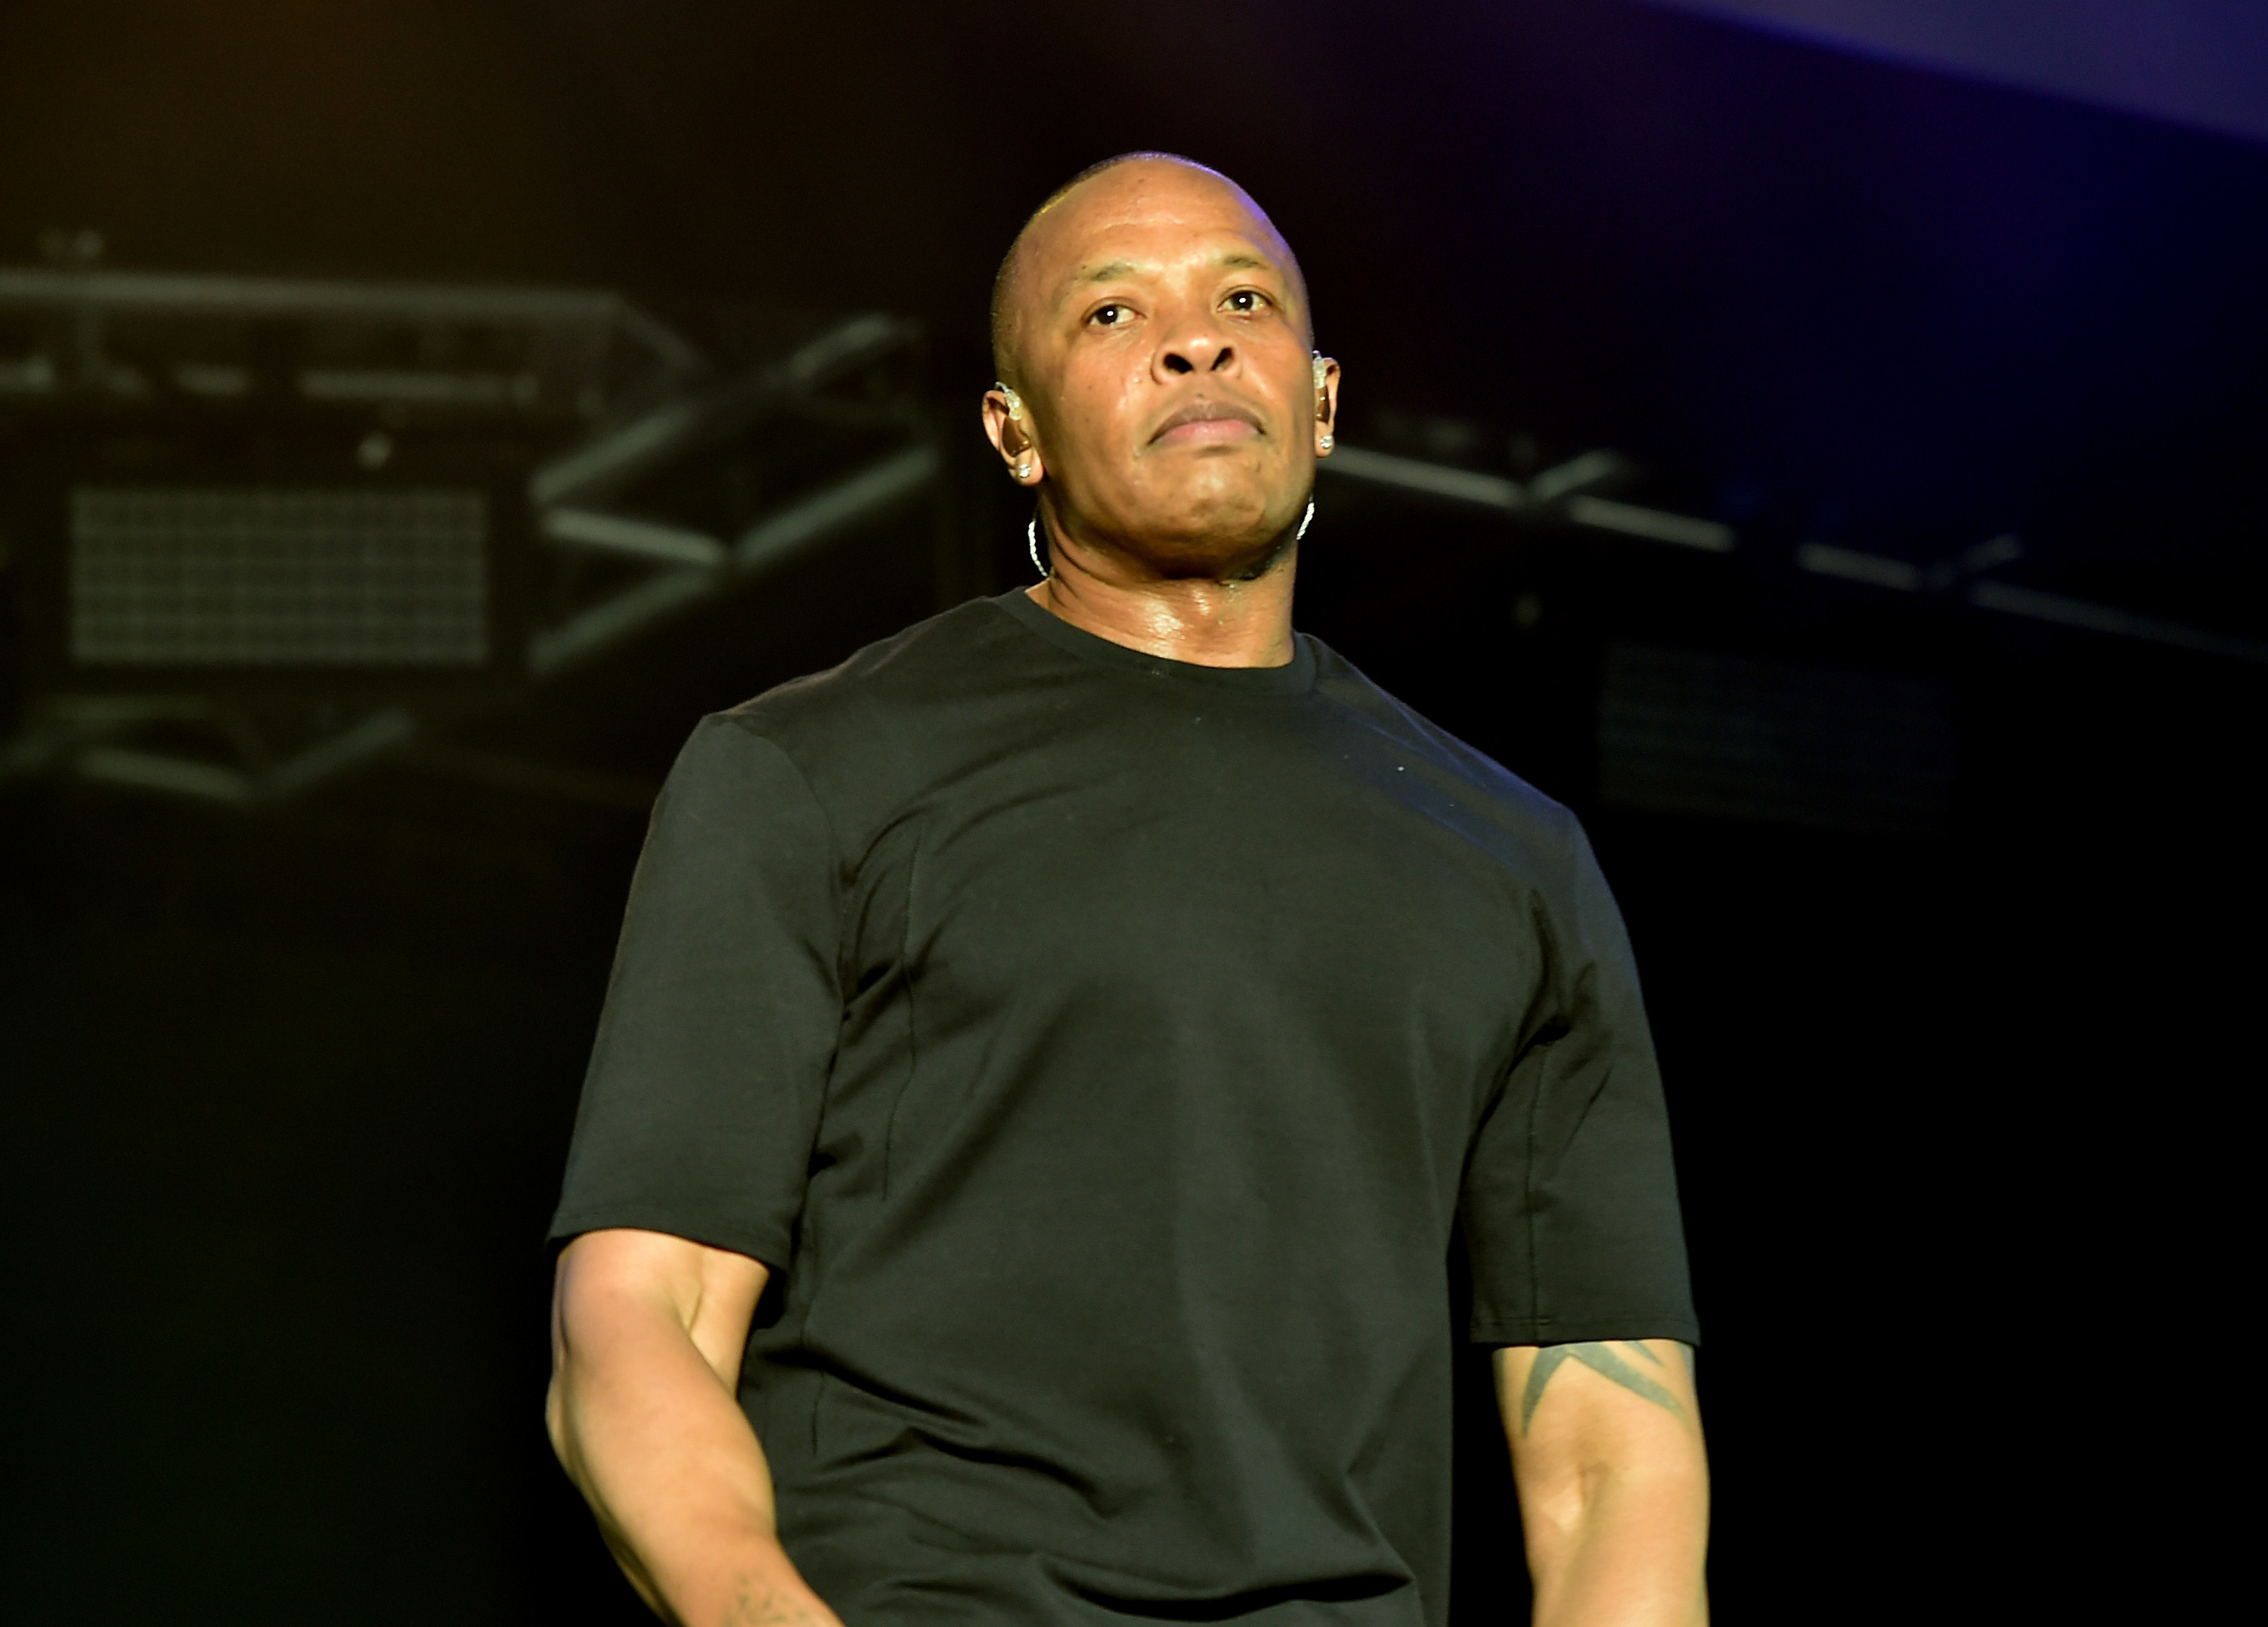 Recording artist Dr. Dre  performs onstage during day 2 of the 2016 Coachella Valley Music & Arts Festival Weekend 2 at the Empire Polo Club on April 23, 2016 in Indio, California. (Kevin Winter—Getty Images)